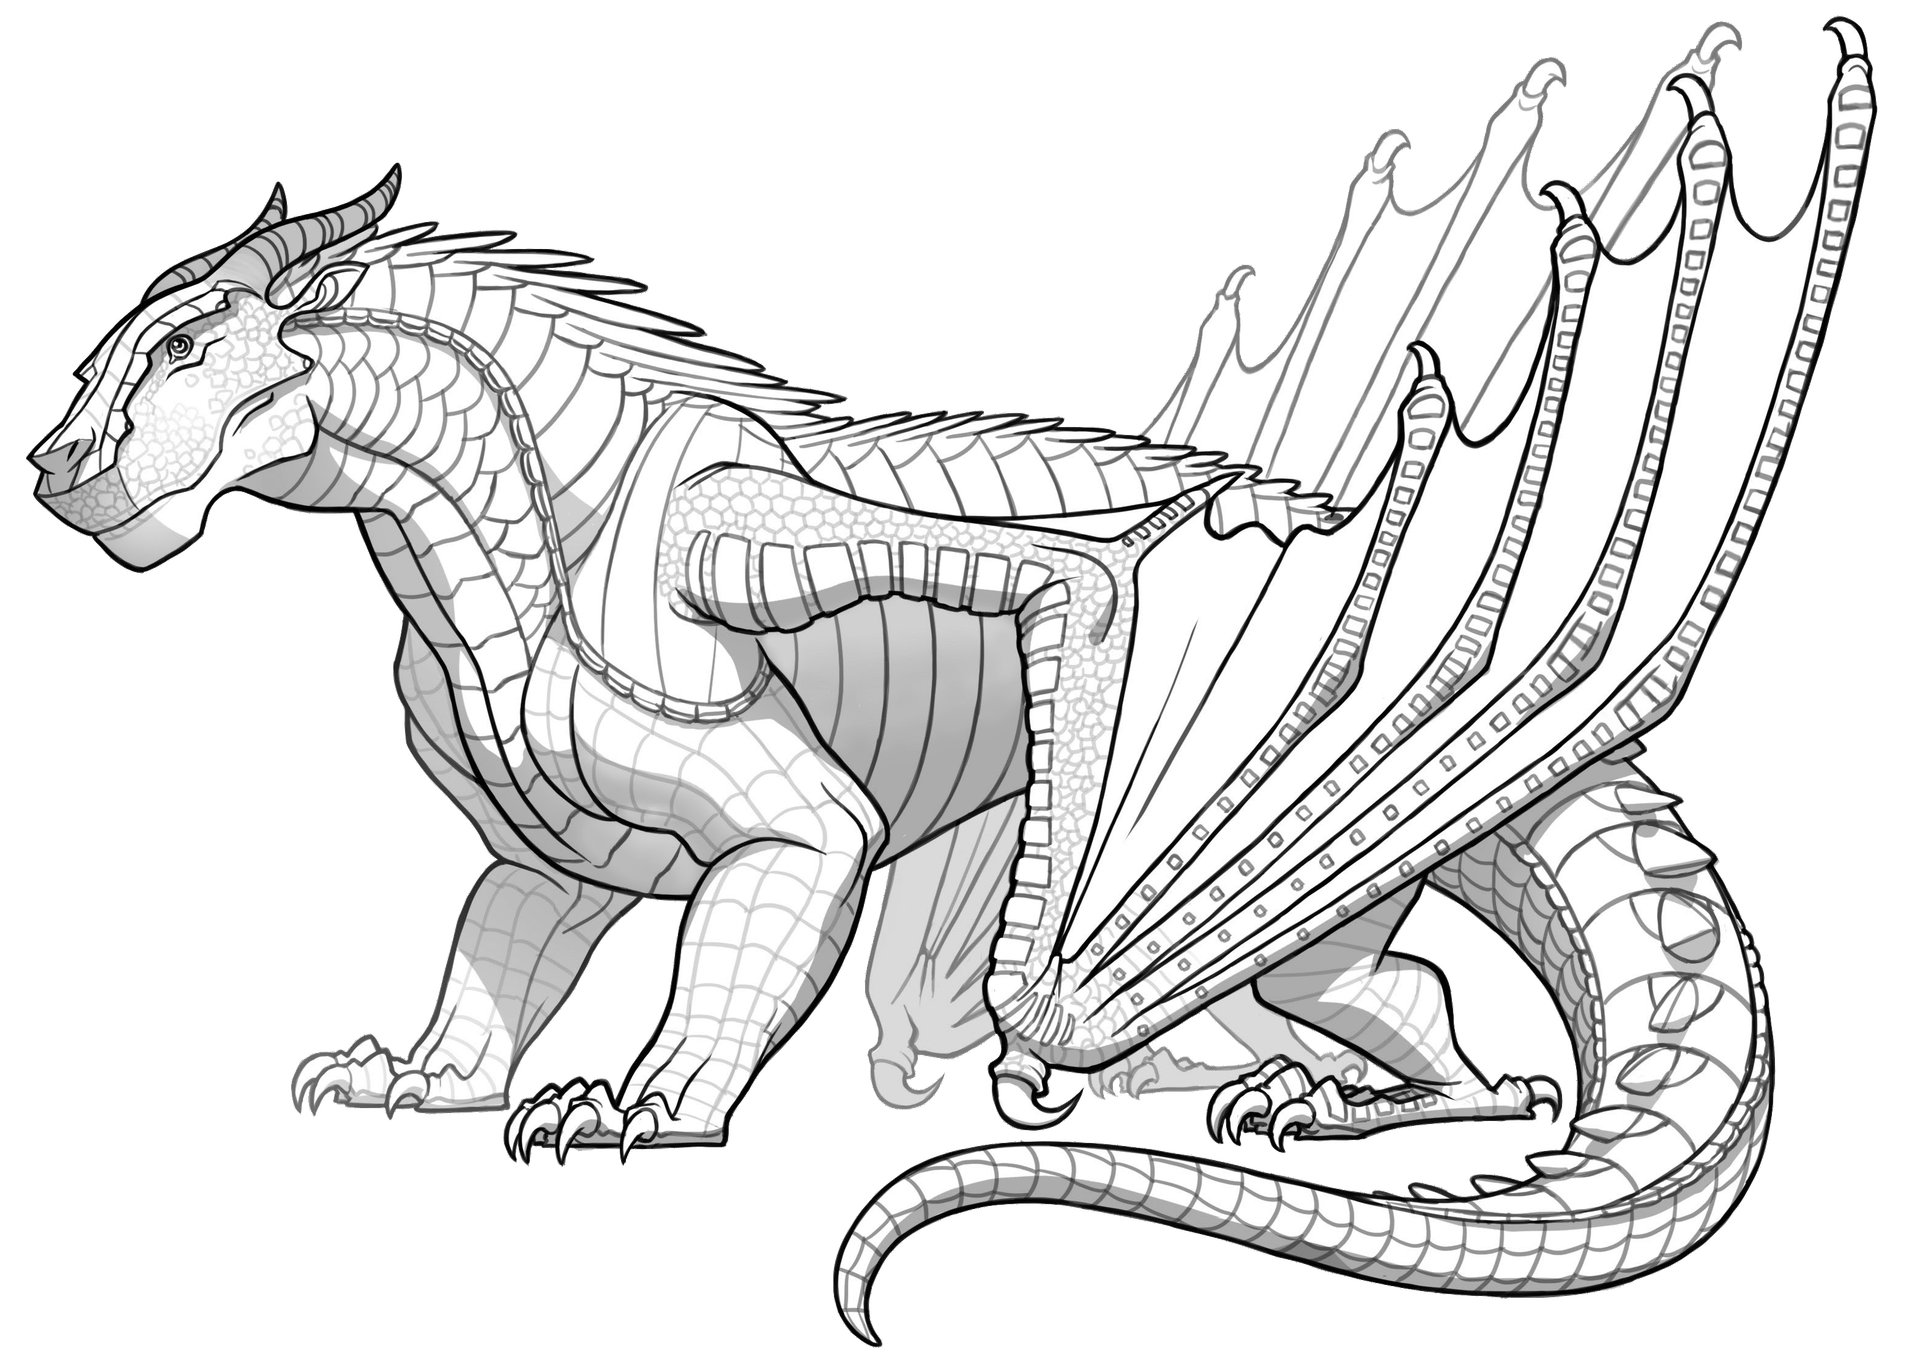 Wings of Fire Color Edits (COMPLETE) - Requests + Original Line Arts | Zoo  animal coloring pages, Dragon coloring page, Pokemon coloring pages